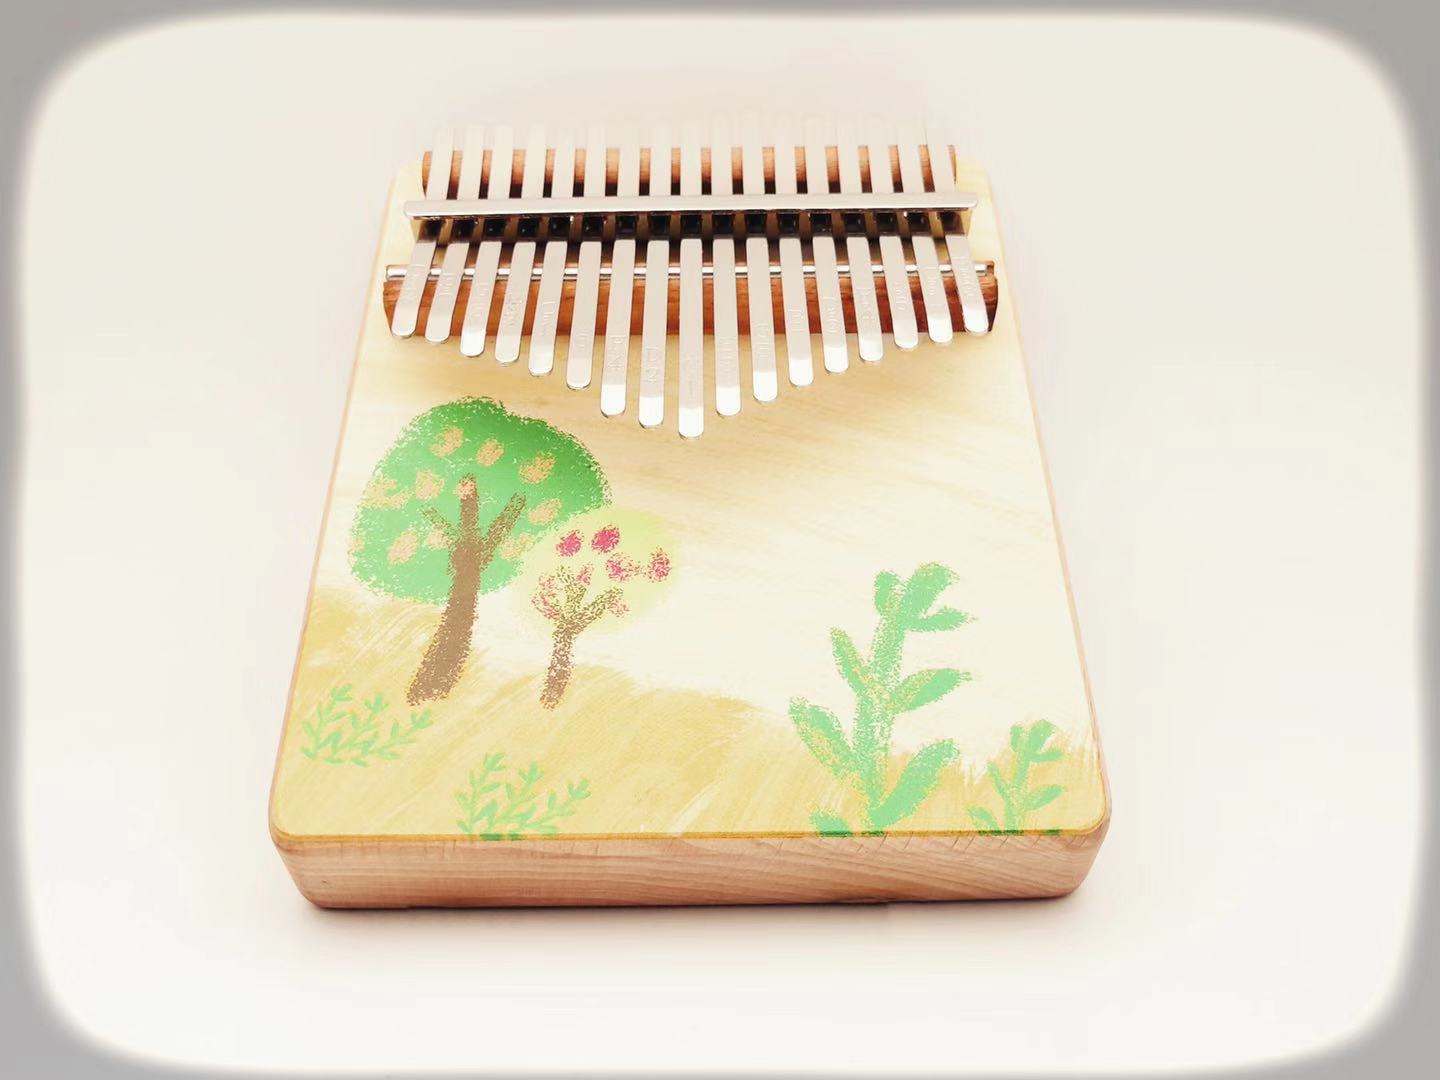 17 Key Country-Style Acoustic and Electric Kalimba with Beautiful Prints - Relaxation Studio